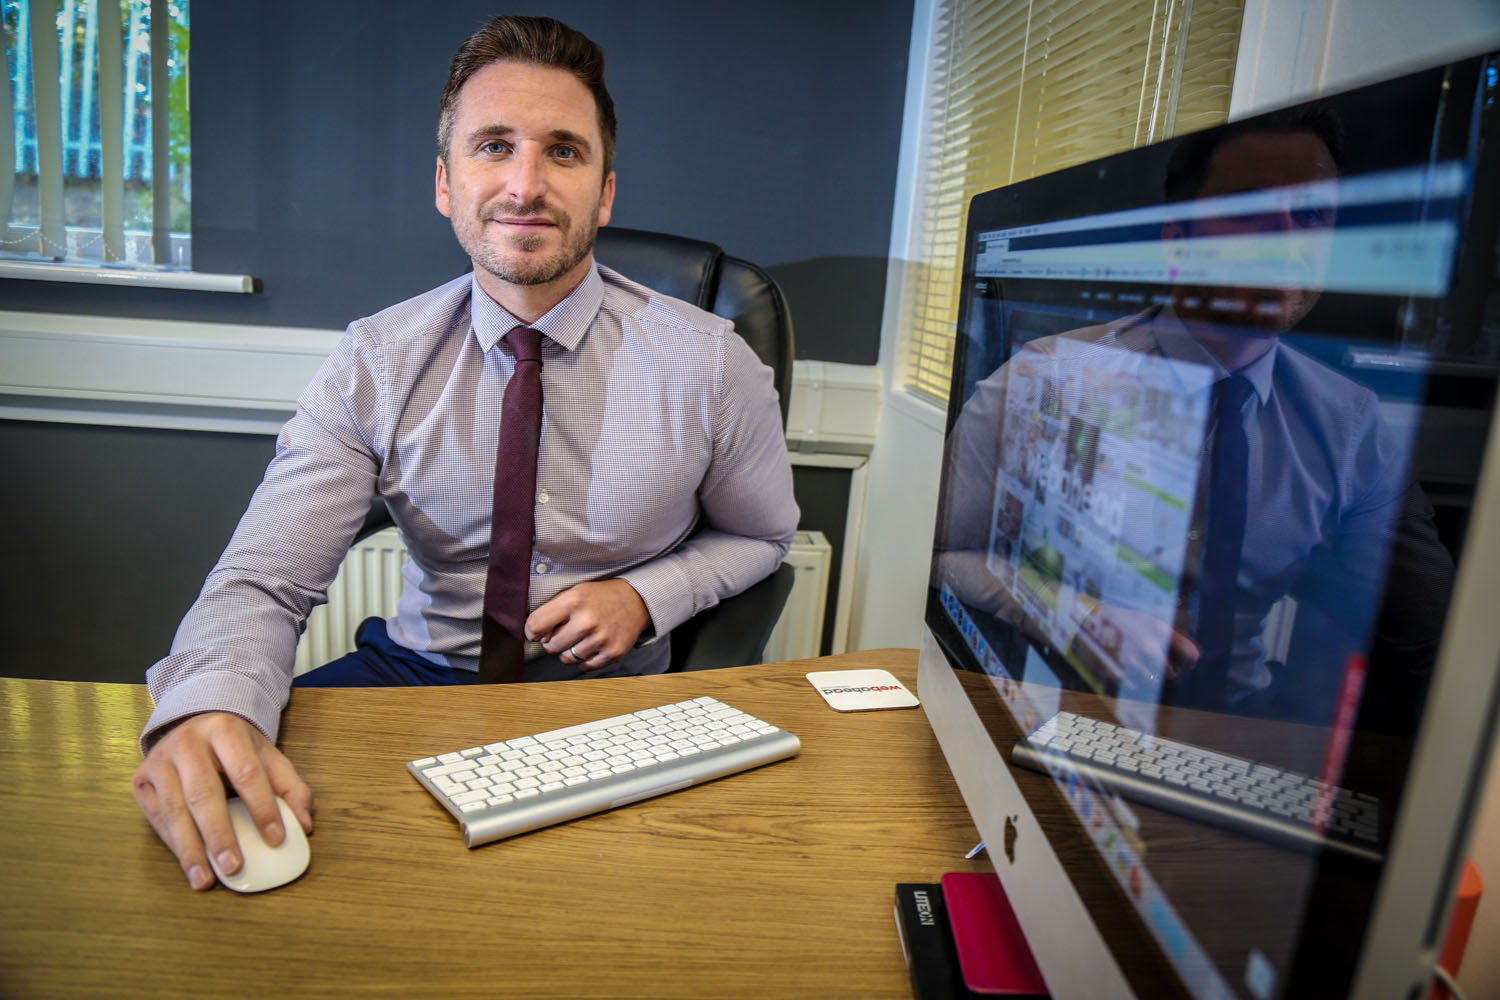 Web Firm Ahead of the Game as Sales Set to Top £1m